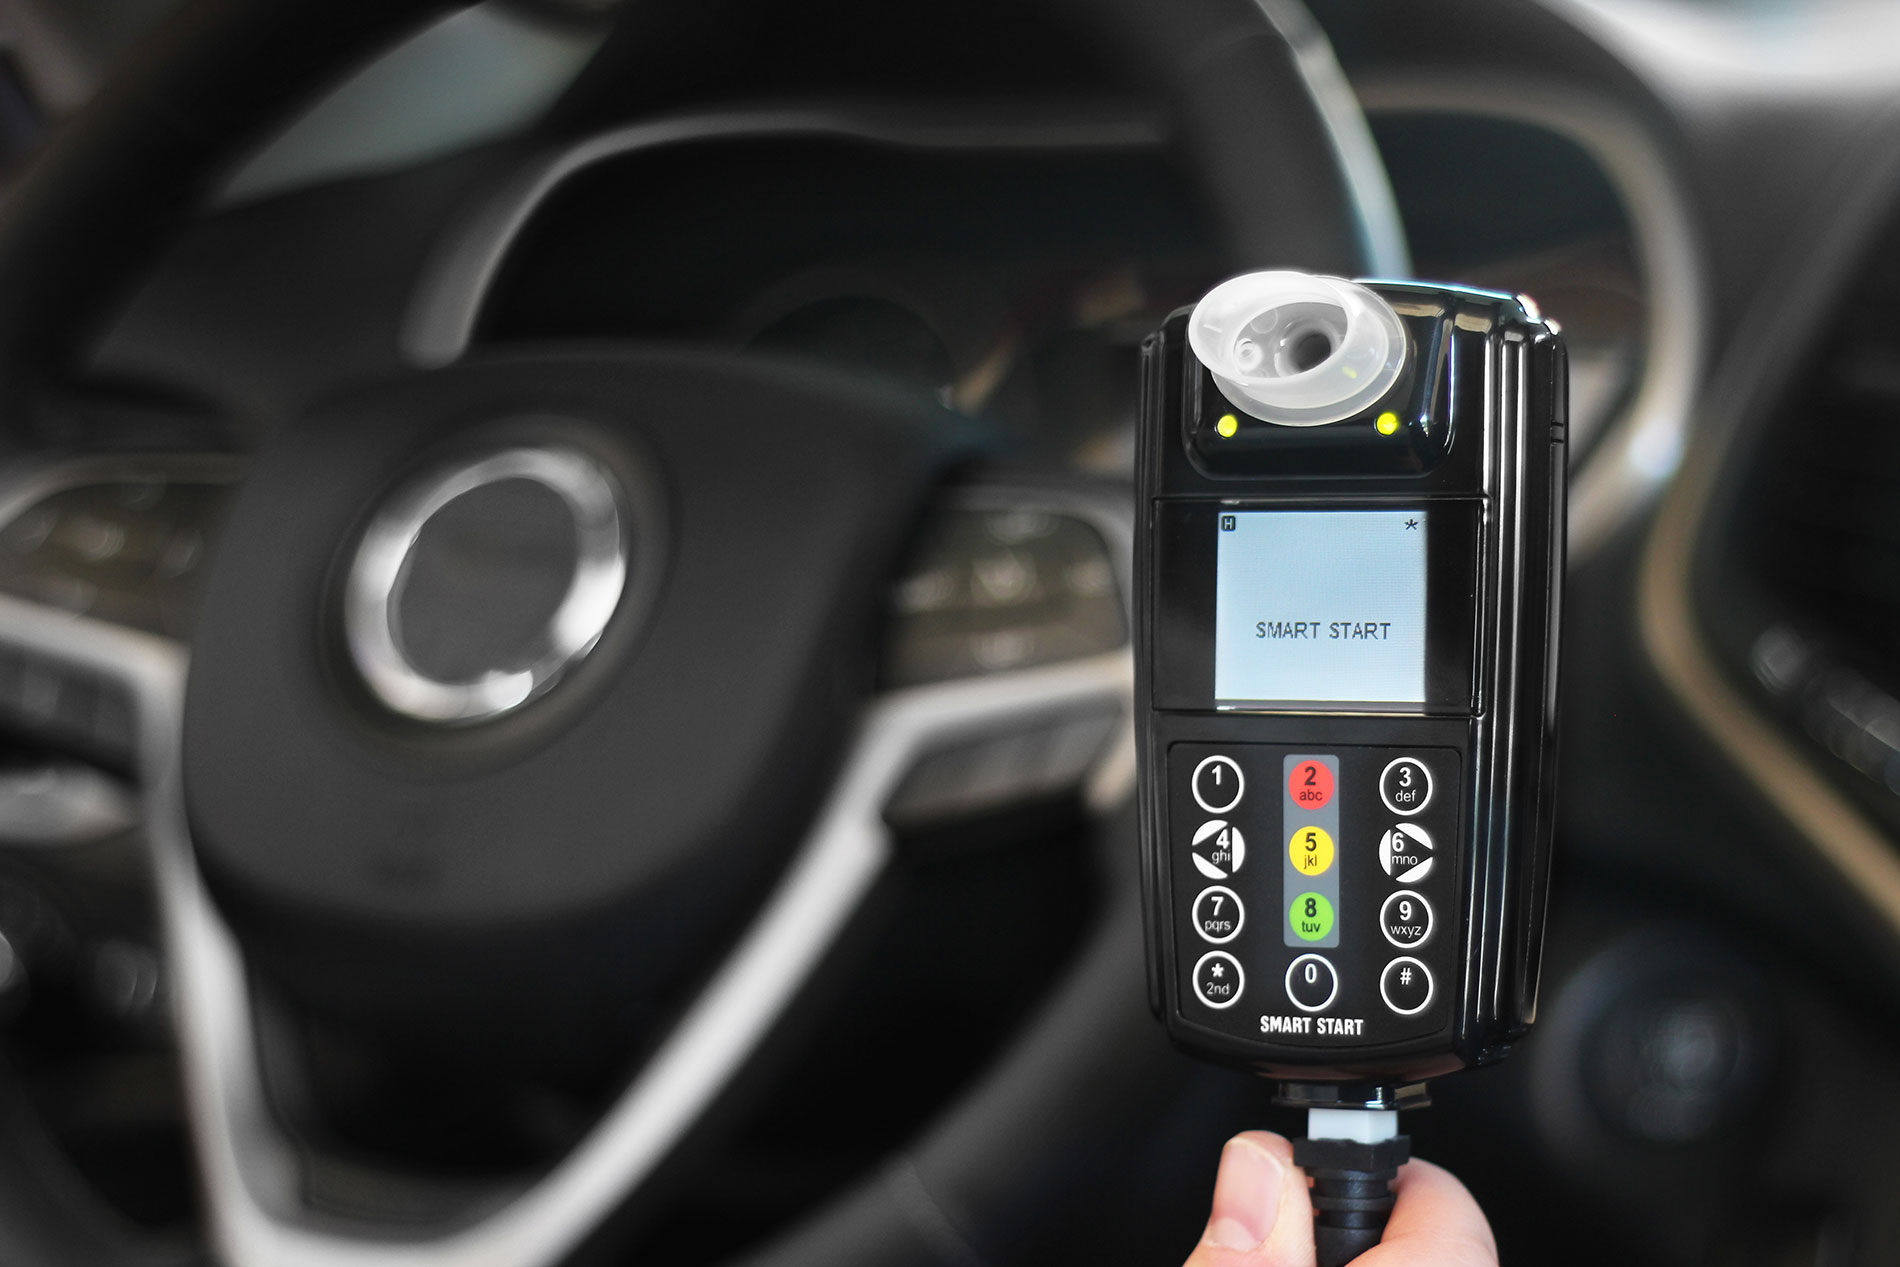 Ignition Interlock Devices Market to Register Steady Growth by 2021